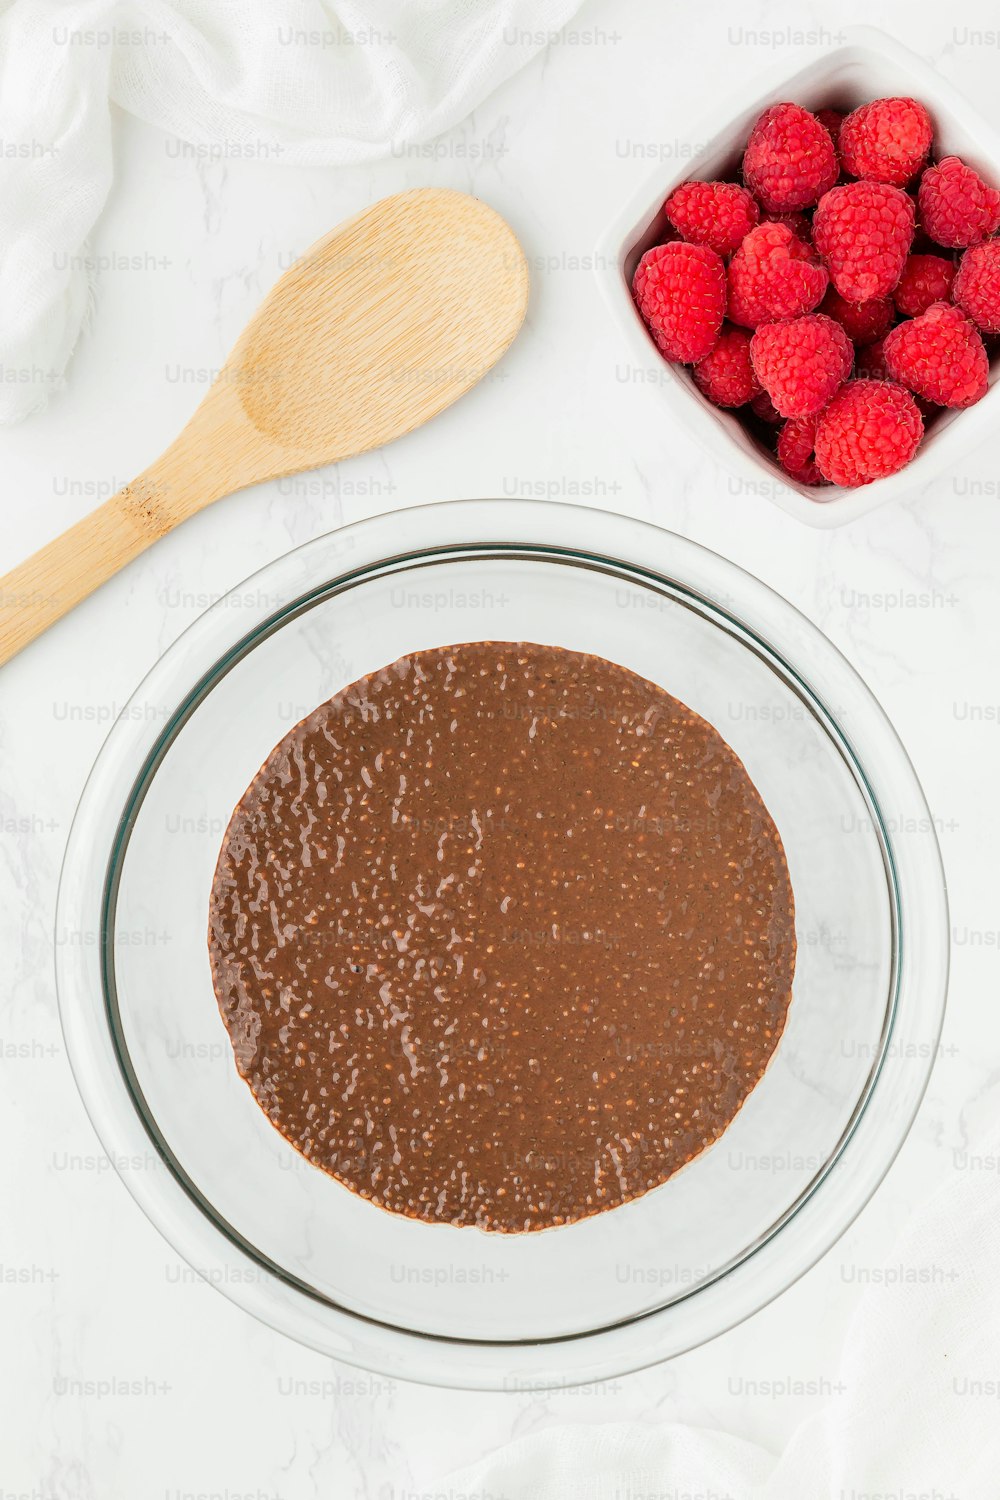 a bowl of chocolate pudding next to a bowl of raspberries